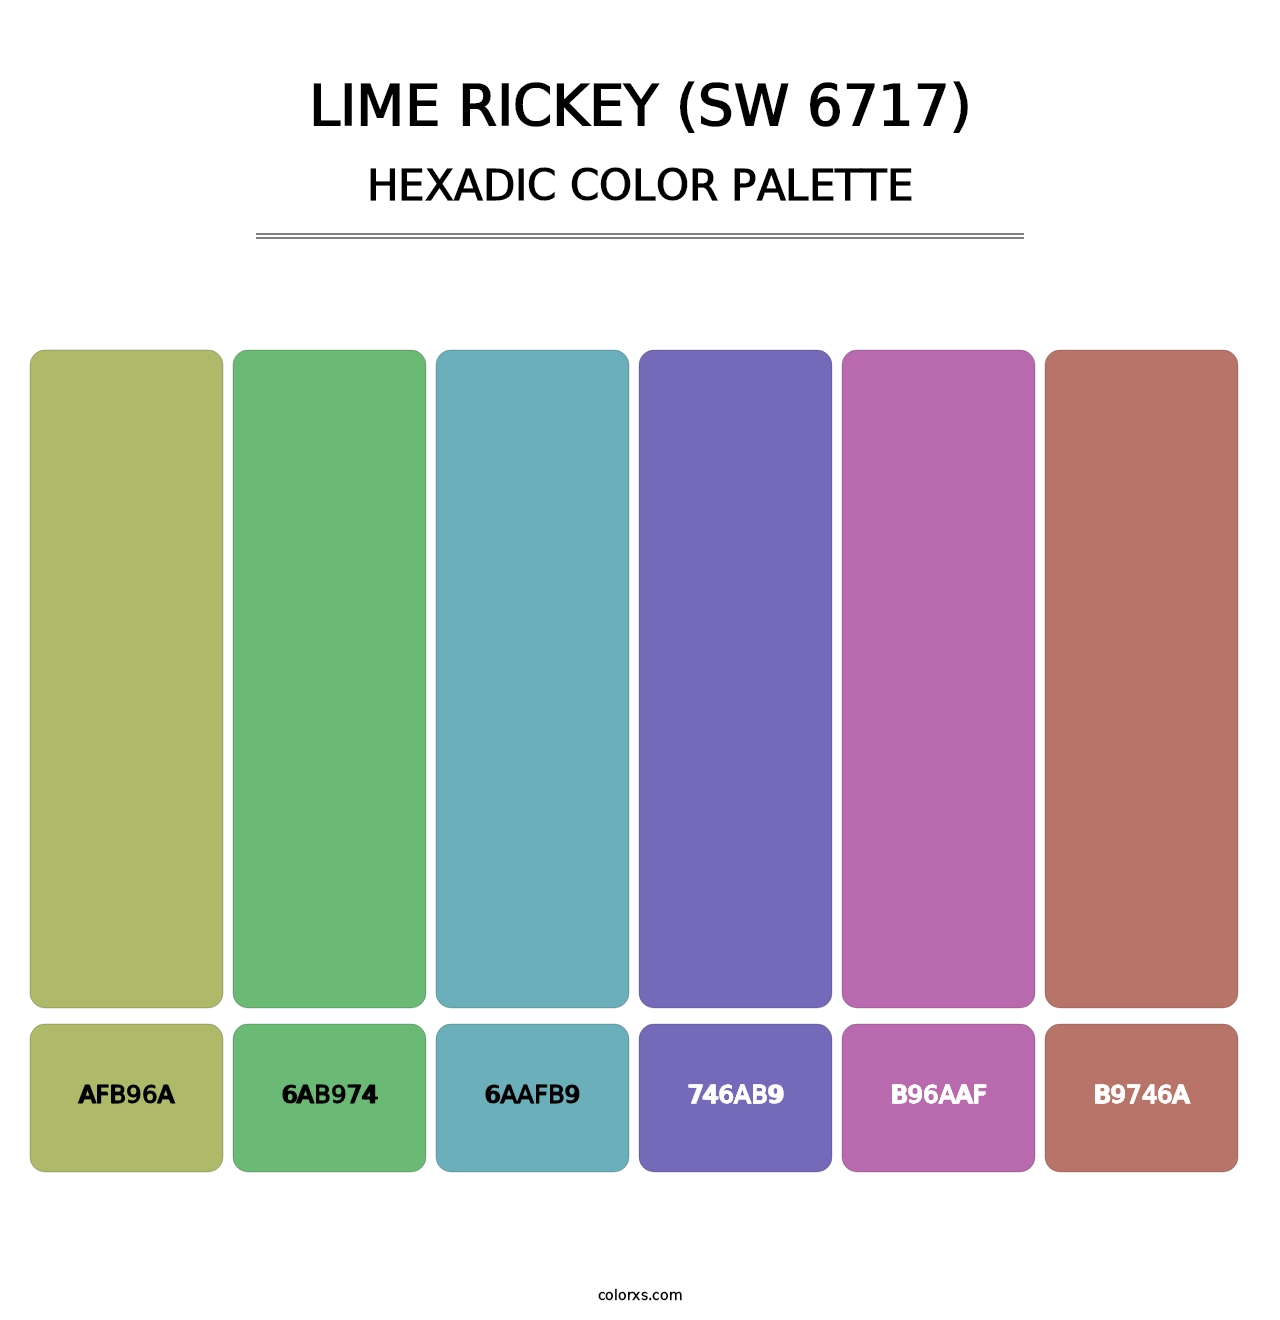 Lime Rickey (SW 6717) - Hexadic Color Palette